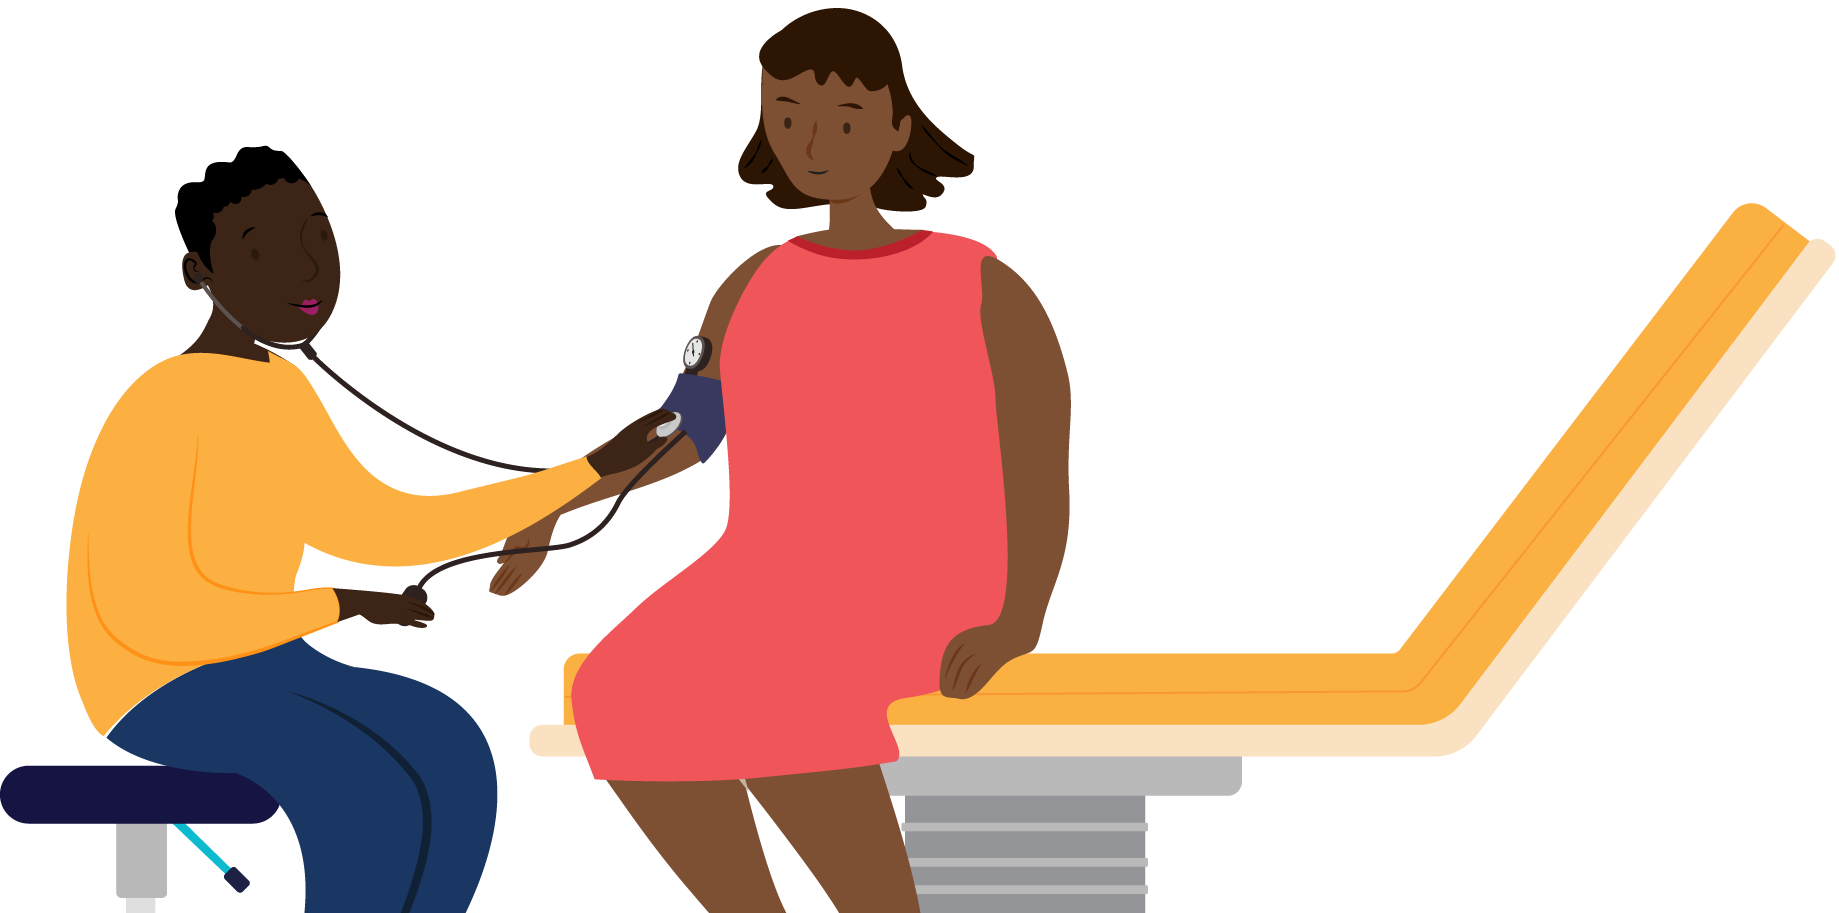 Illustration of a physician taking a patient’s blood pressure reading, while they set on an exam table